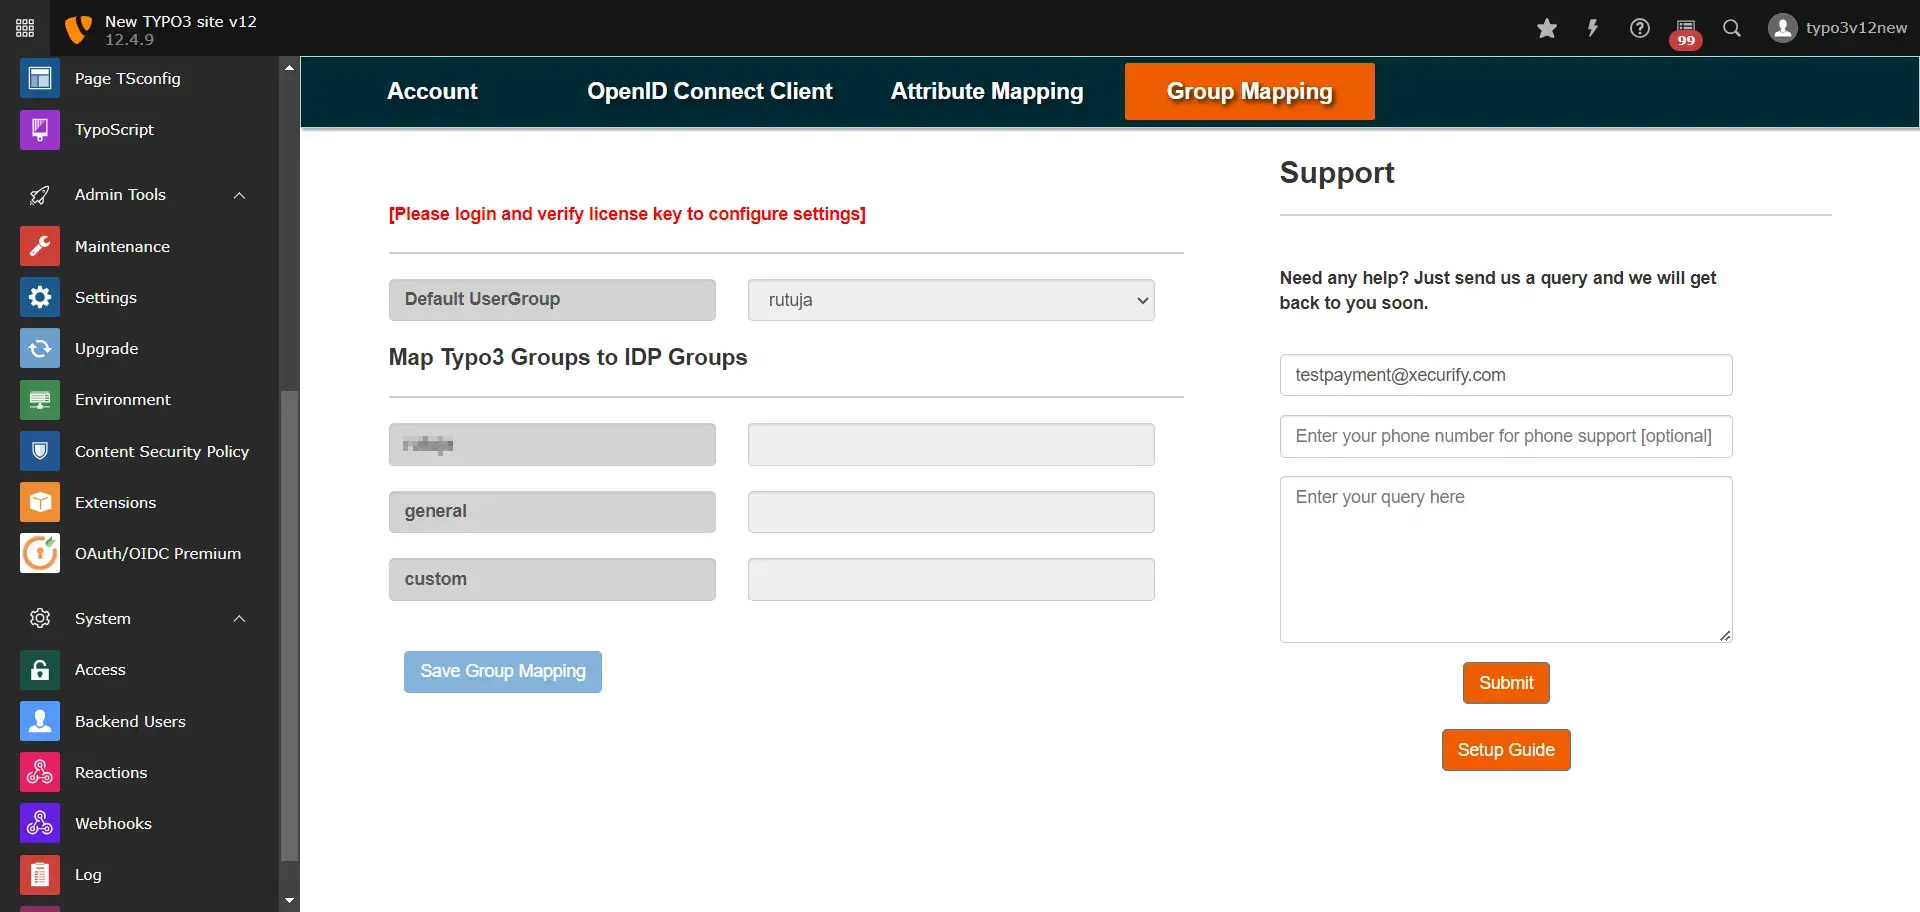 Onelogin Typo3 SSO - Onelogin Single Sign-On(SSO) Login in Typo3 - role mapping